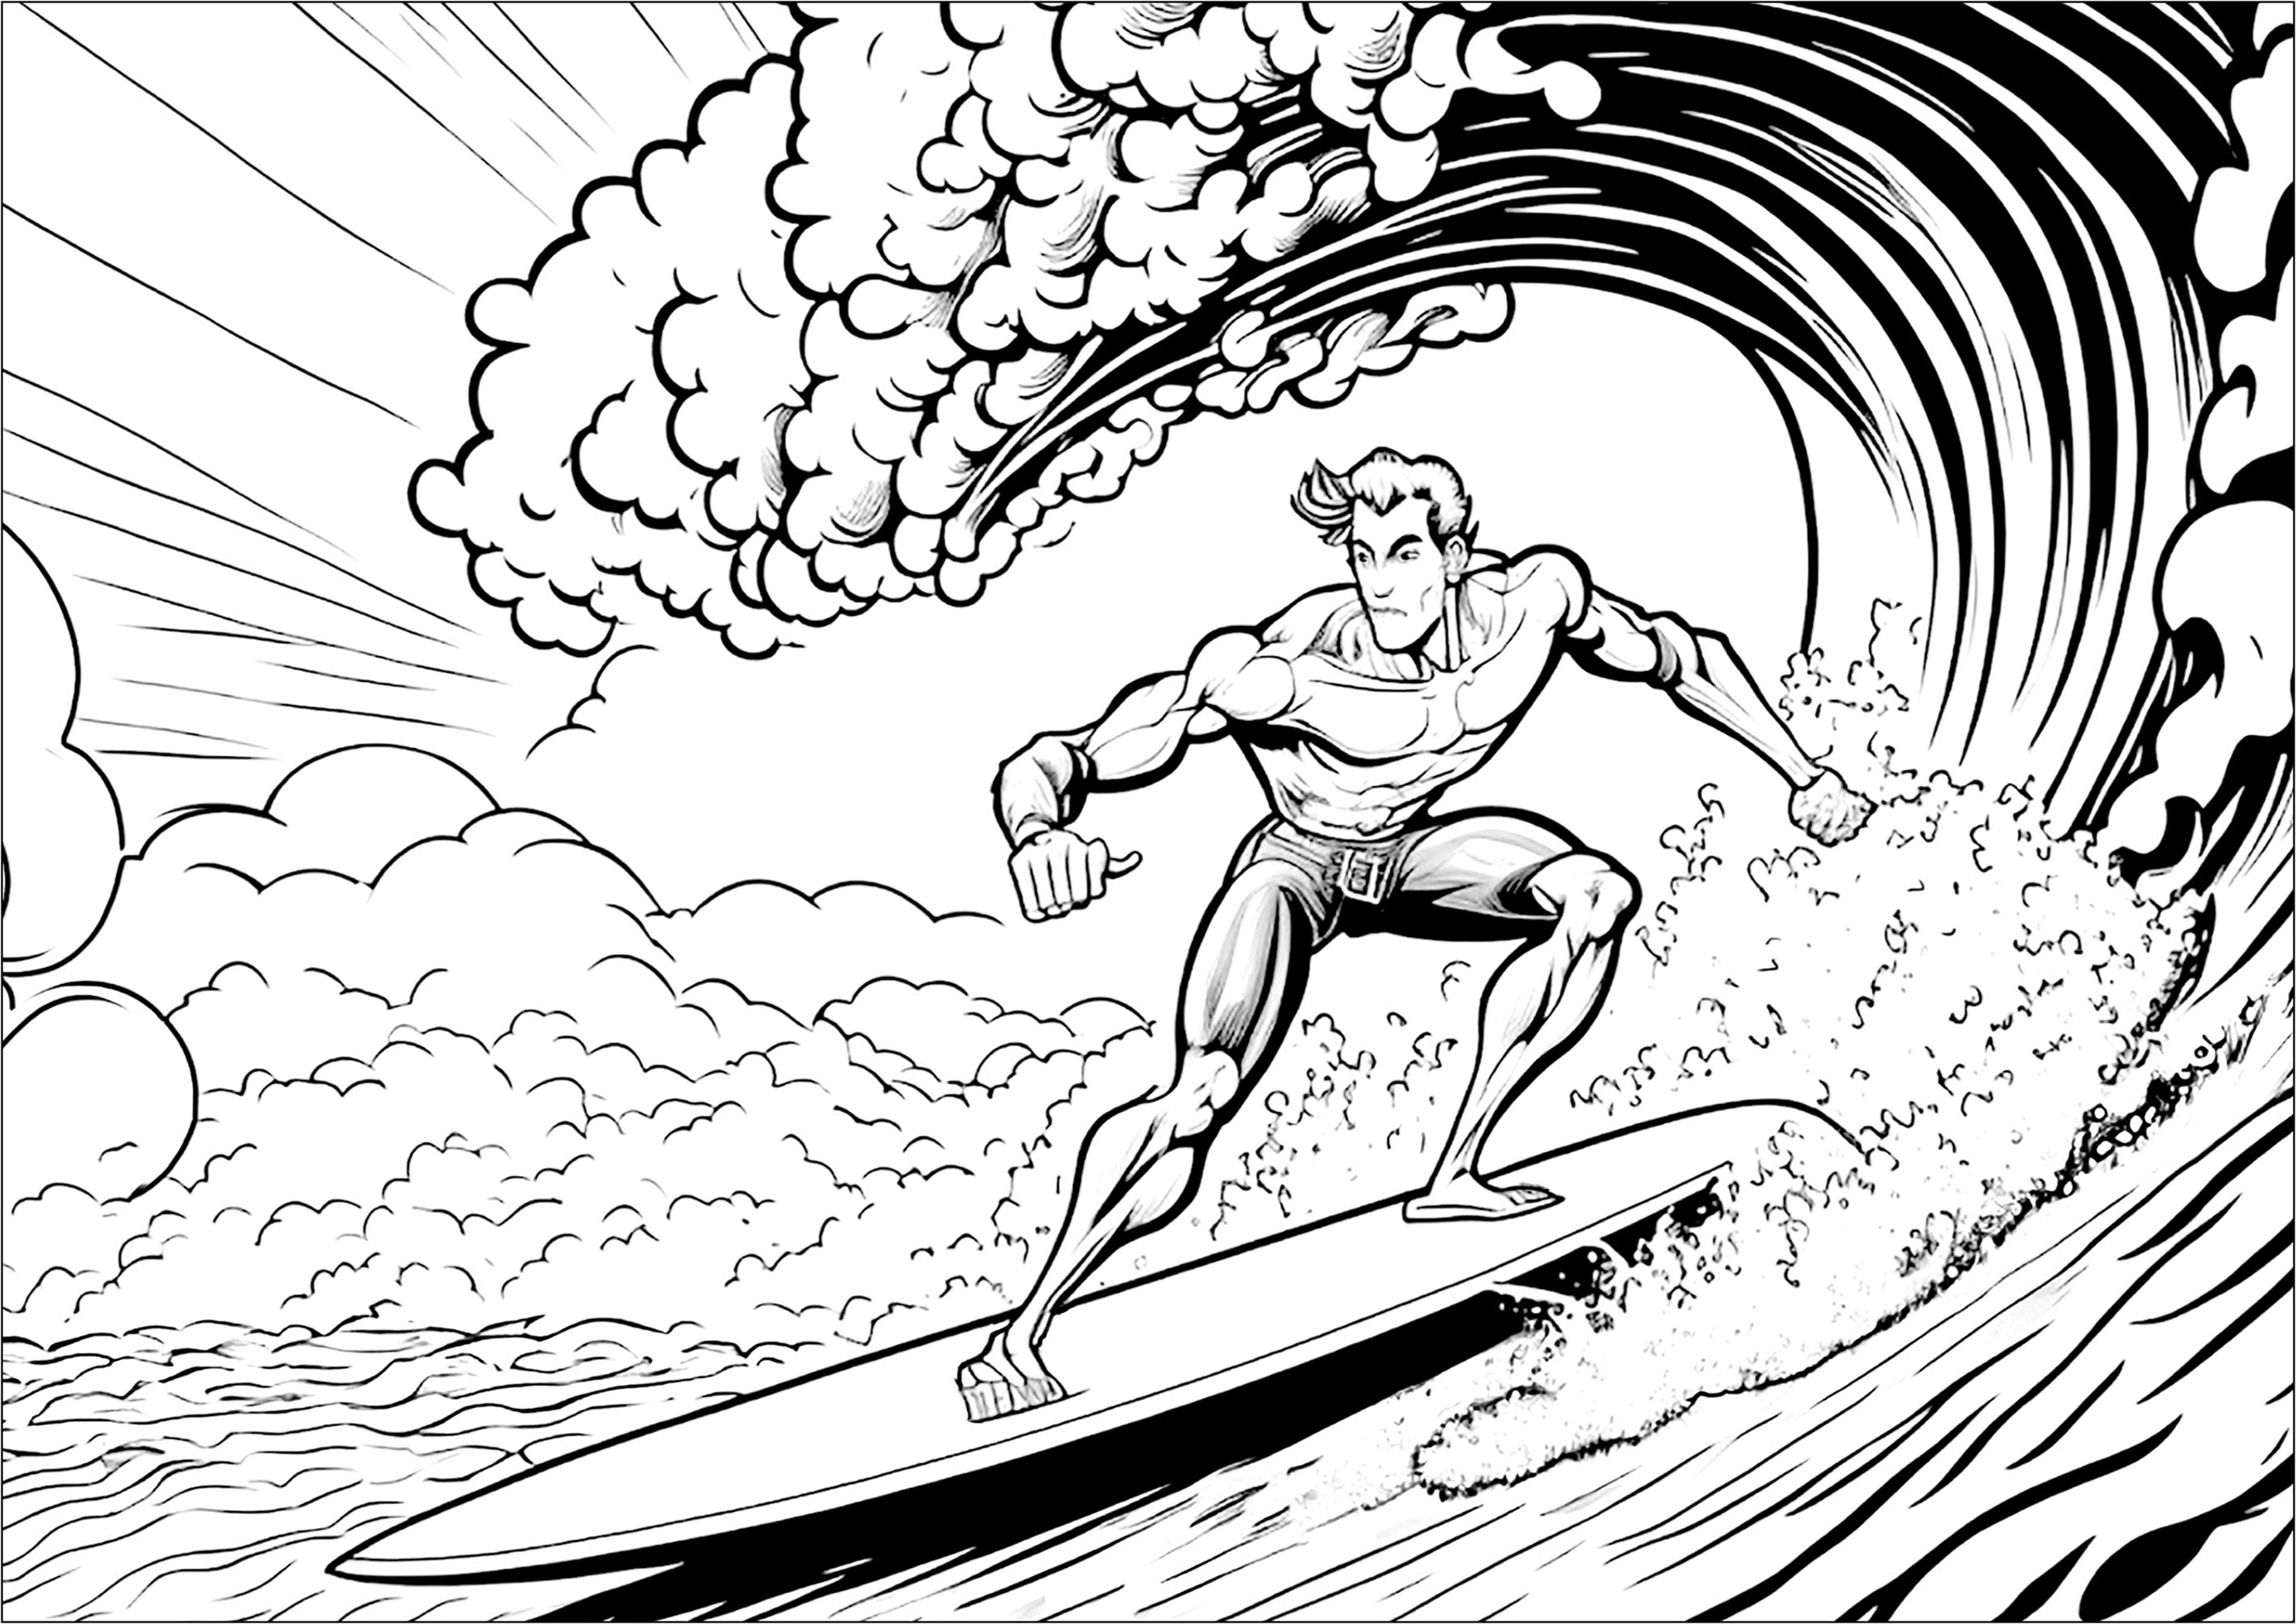 Extreme Surfer Coloring Page. Come ride the waves with this surfer coloring page. He's ready for anything to take on the biggest waves! Join this extreme sports enthusiast as he tames the water monster that is breaking over him.